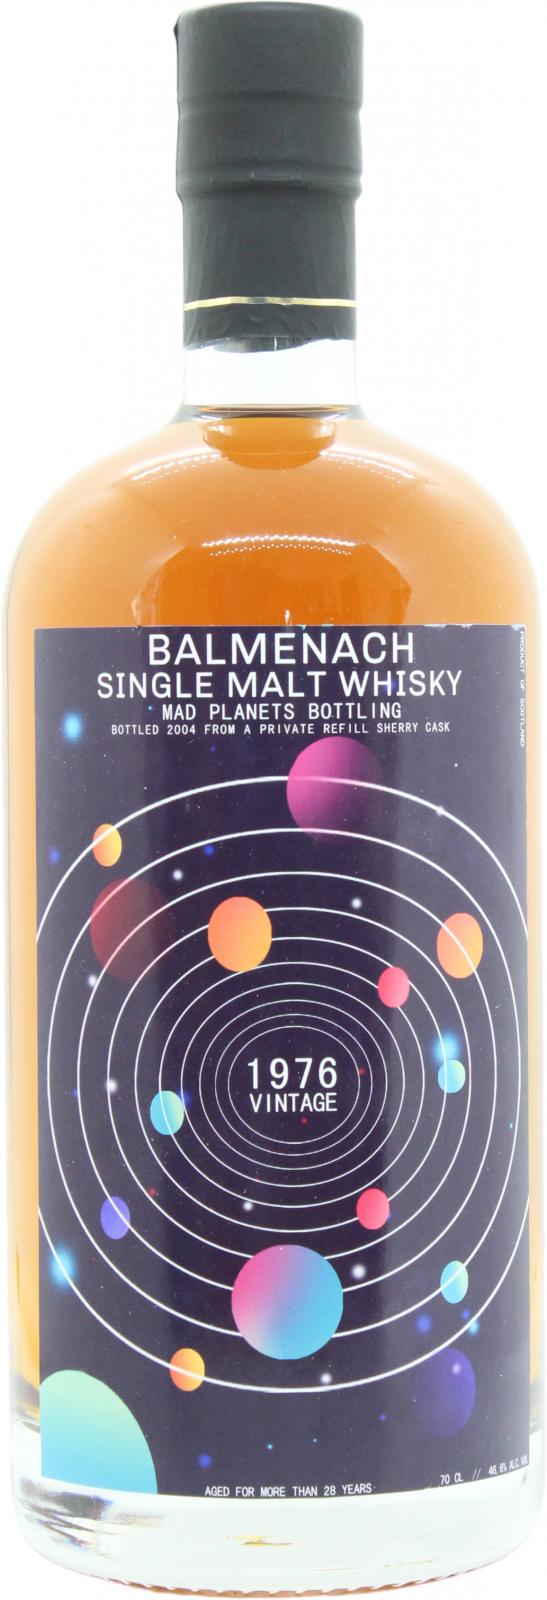 Balmenach 1976 UD Mad Planets Bottling Refill Sherry Cask Private Bottling 46.6% 700ml